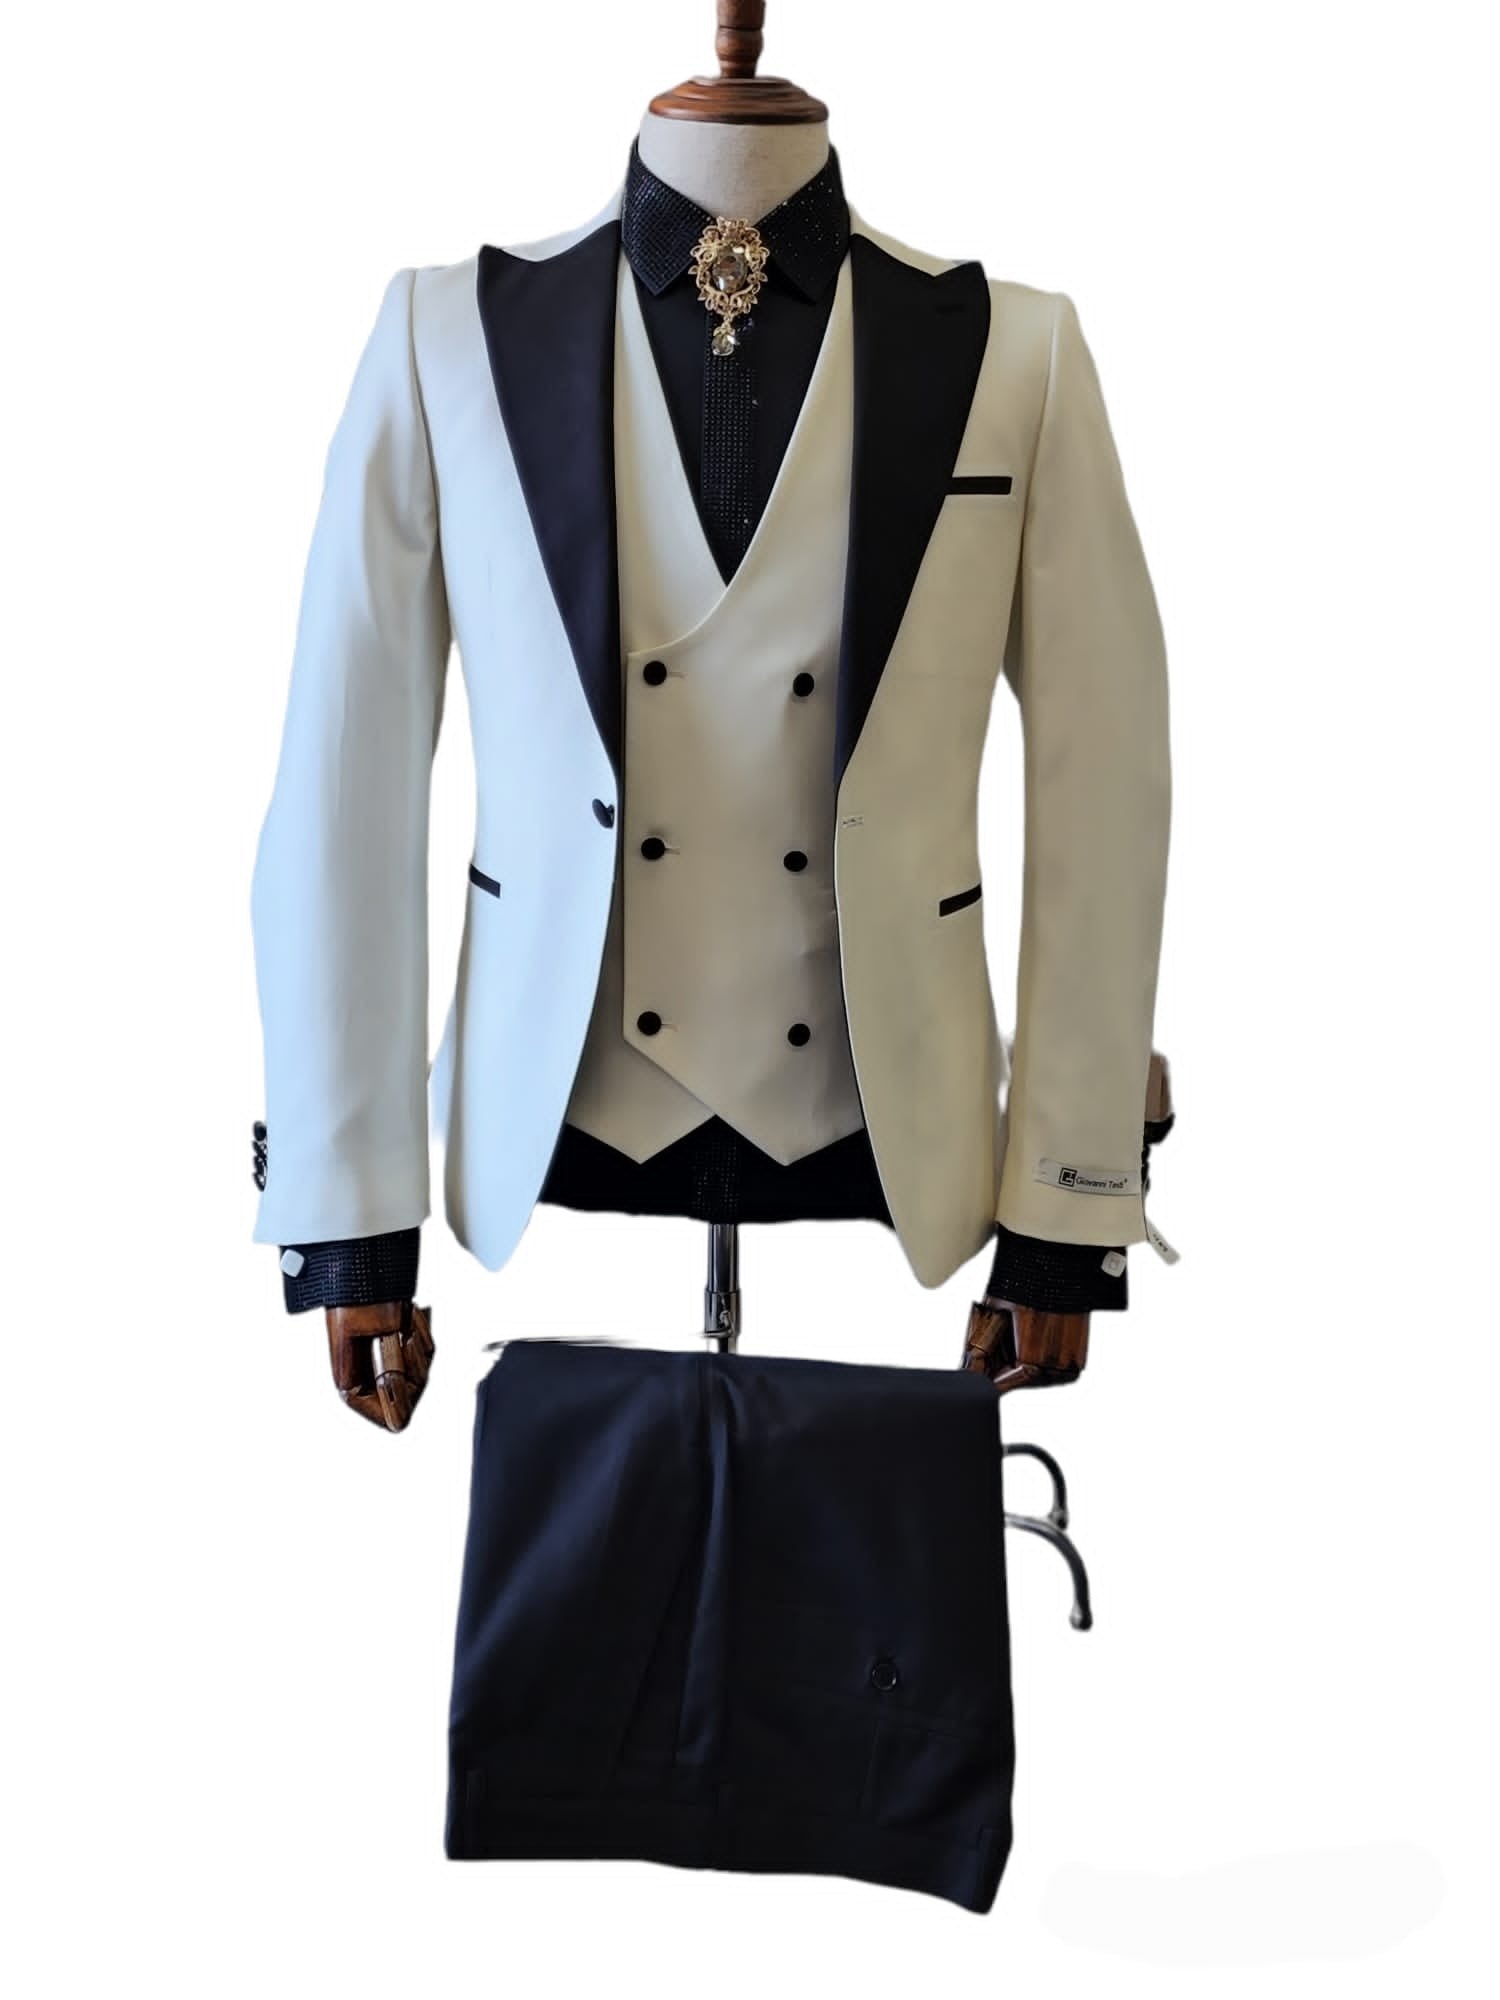 Giovanni Testi Suits With Double Breasted Vest - 3 Piece White